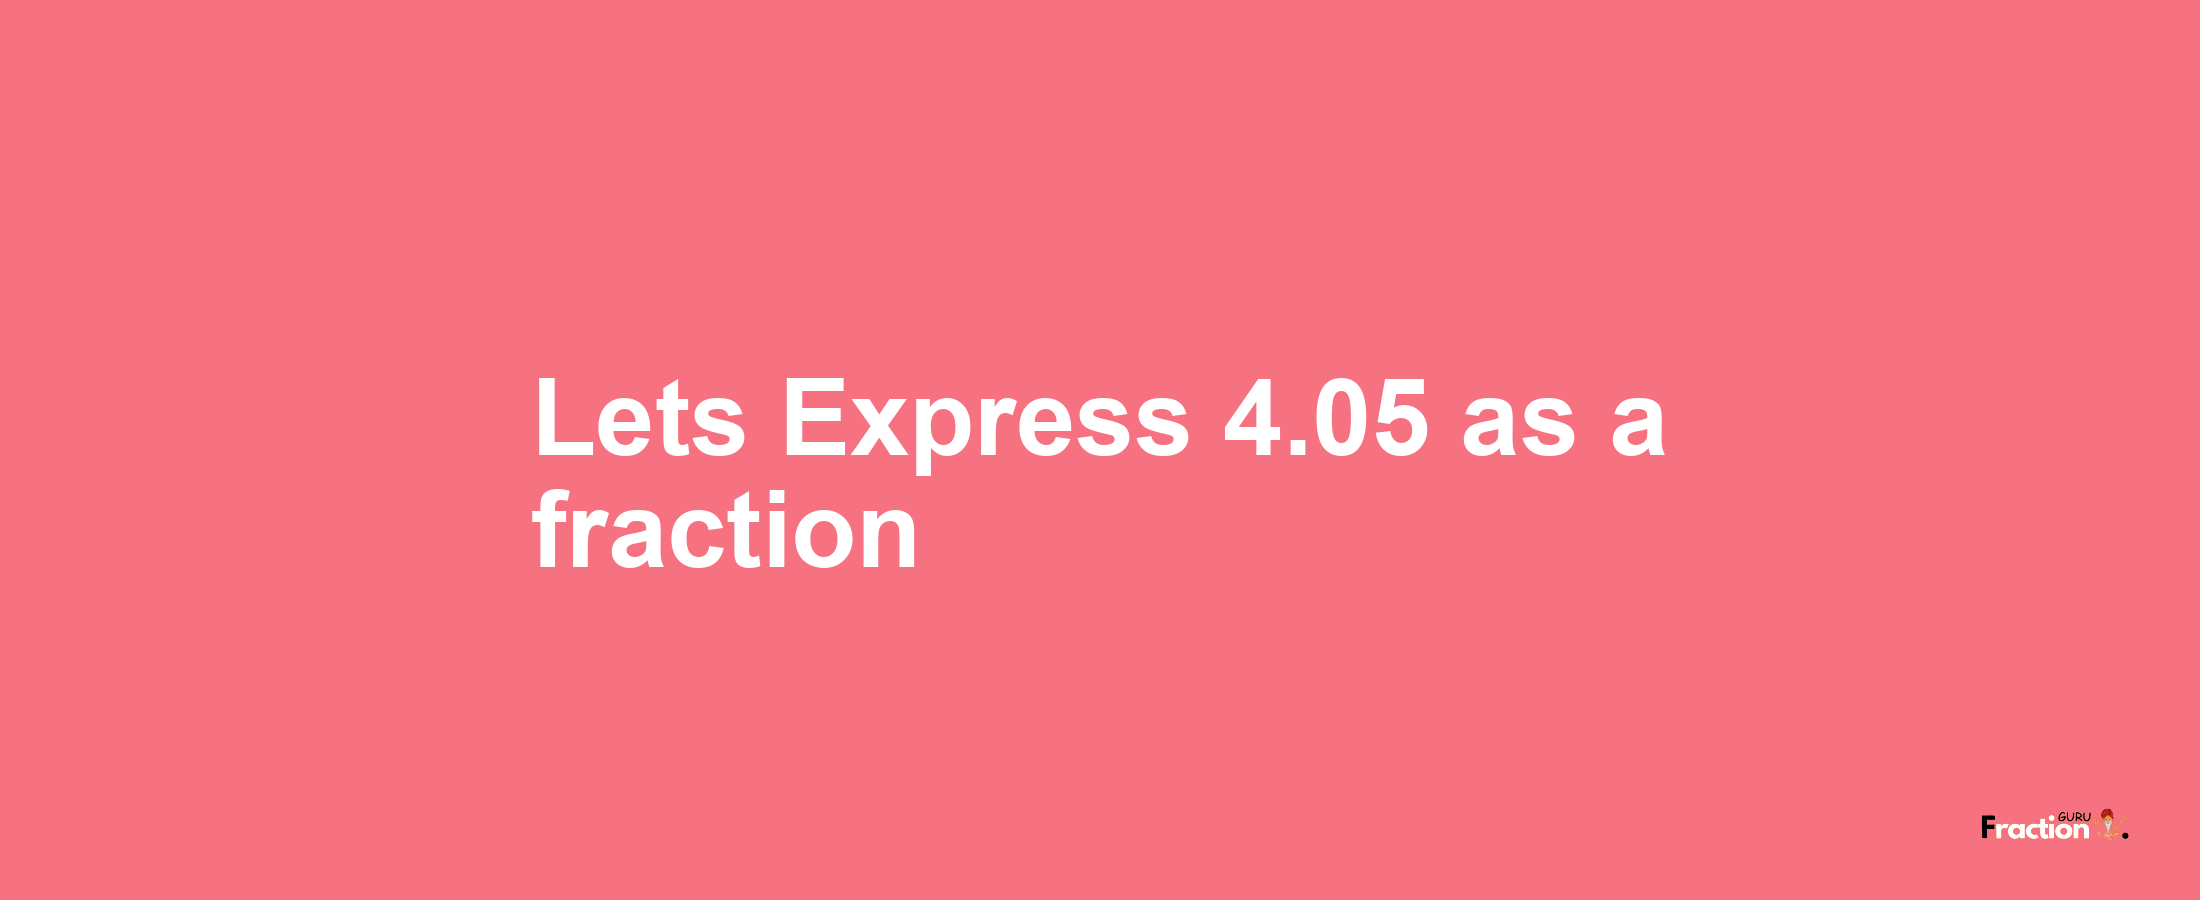 Lets Express 4.05 as afraction